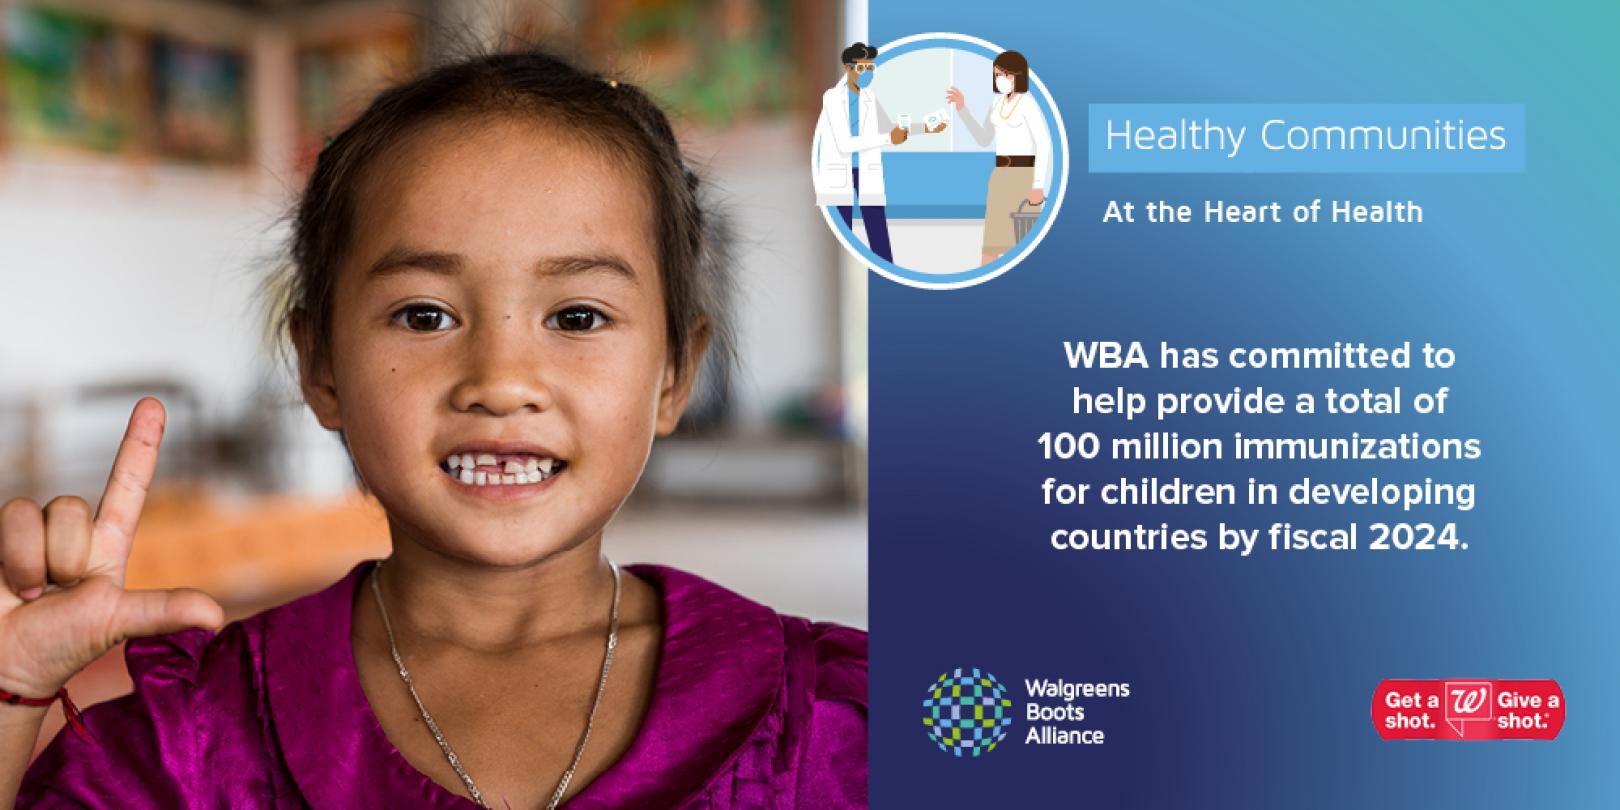 WBA has committed to provide 100 million immunizations for children in developing countries by 2024 Twitter LinkedIn 